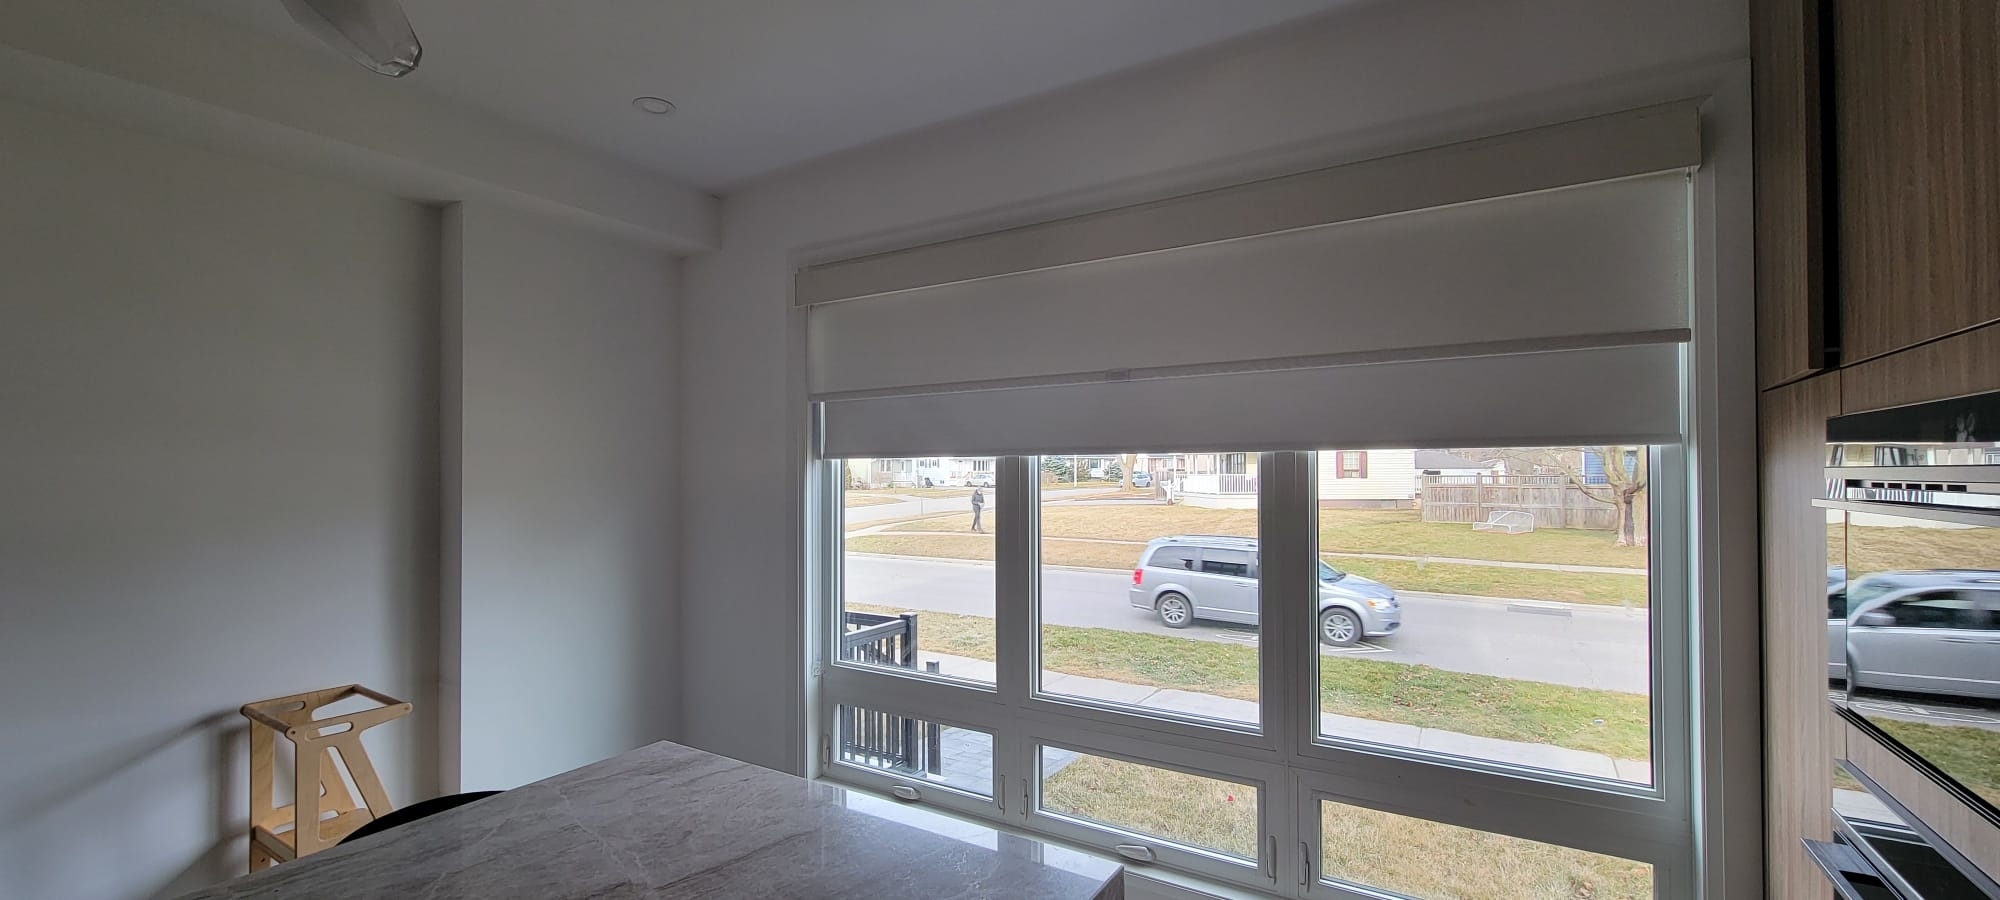 Budget Blinds of Ajax and Whitby - Window Shade & Blind Stores